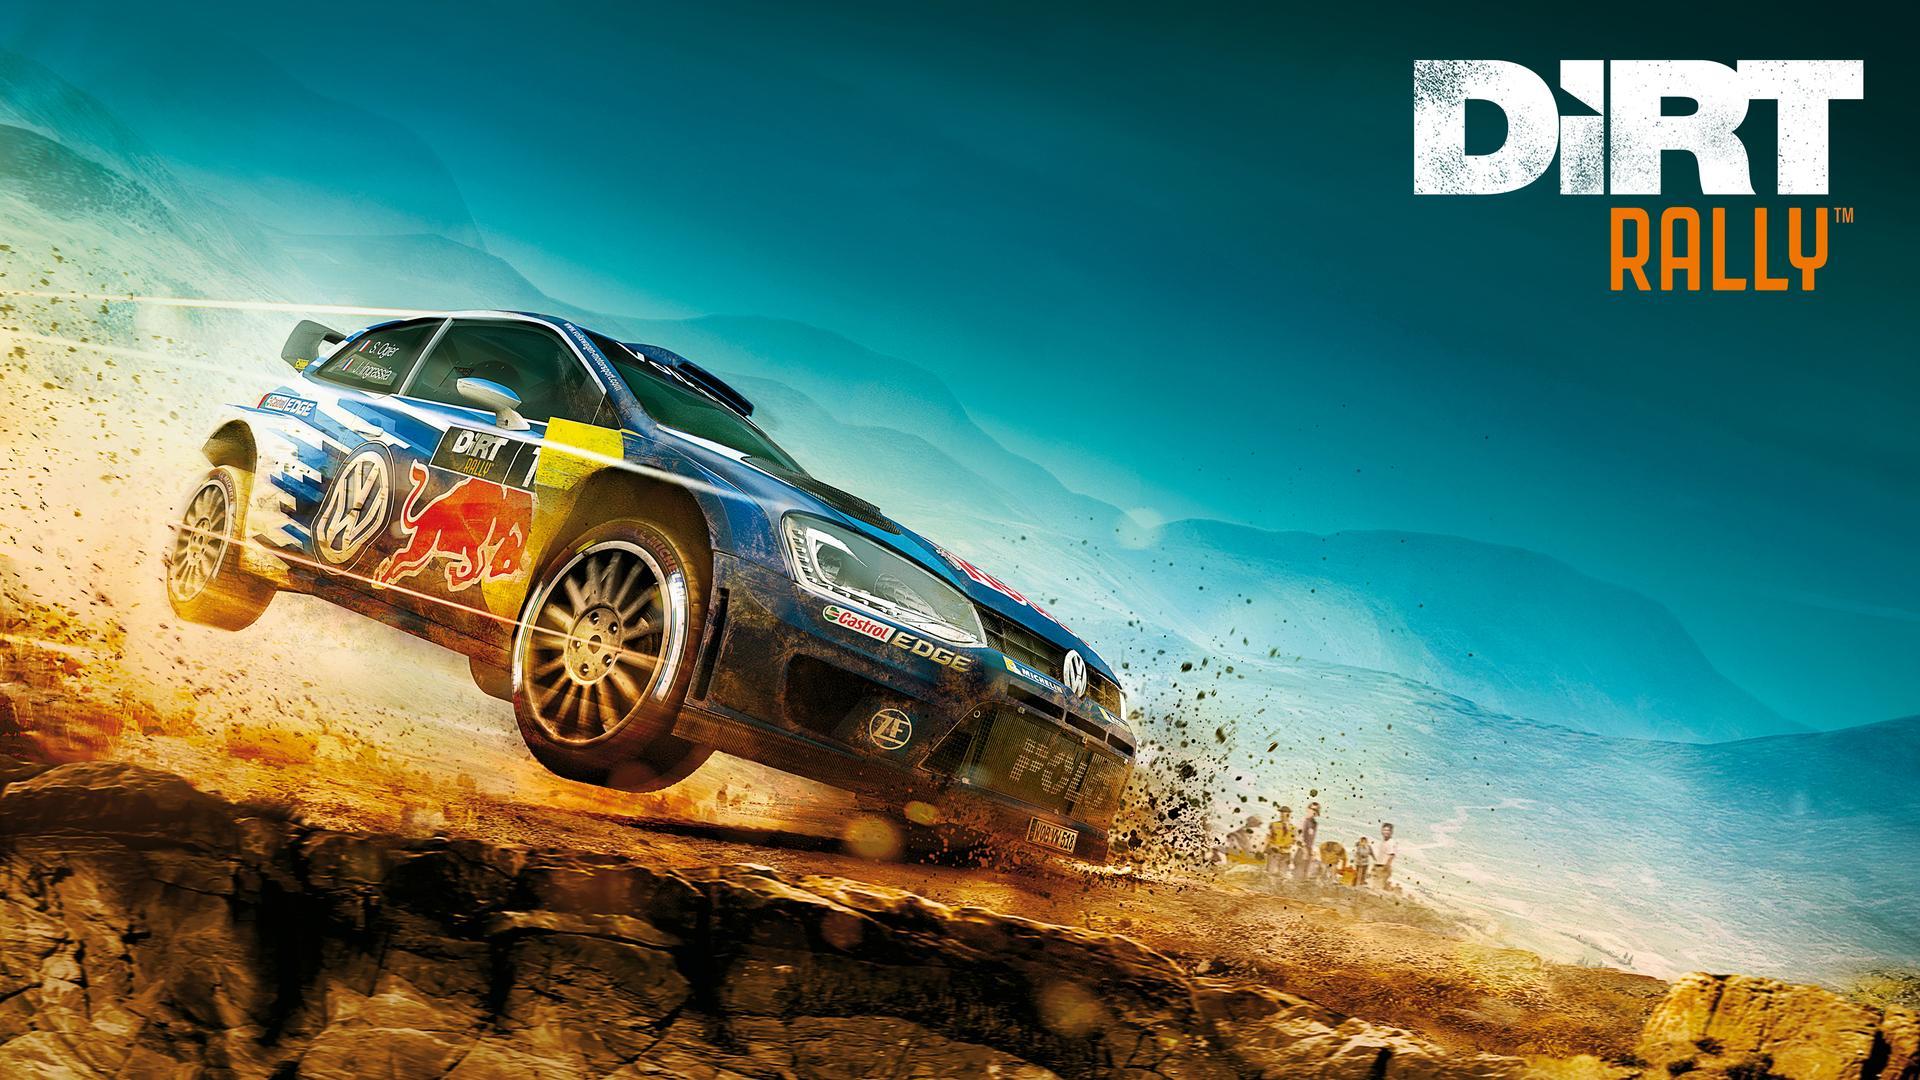 Volkswagen Polo. Wallpaper from DiRT Rally